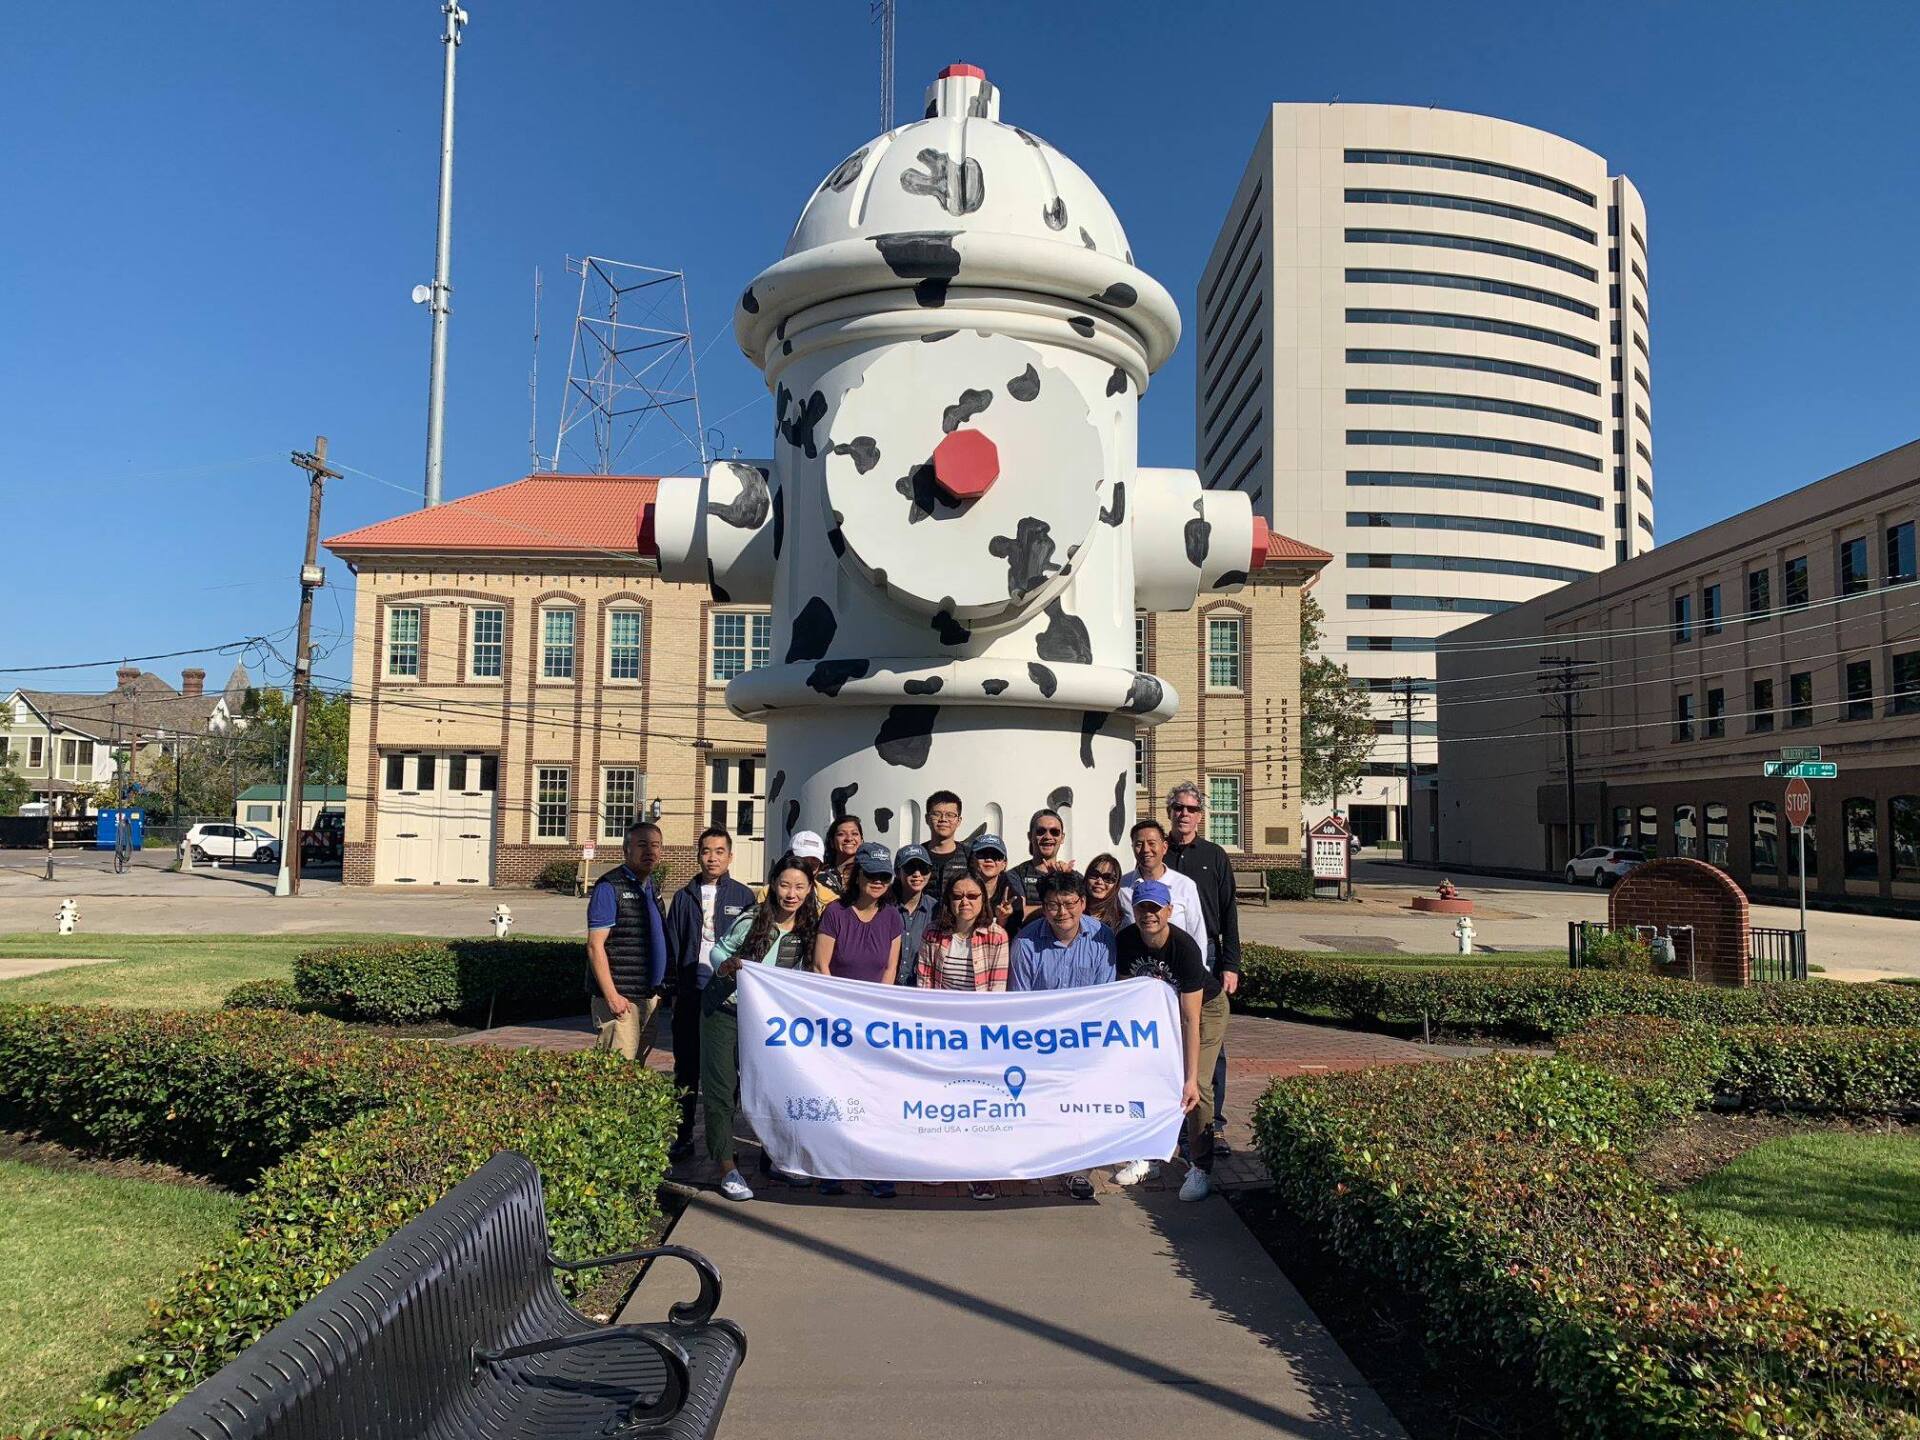 World’s Largest Working Fire Hydrant: Beaumont, Texas, sets world record